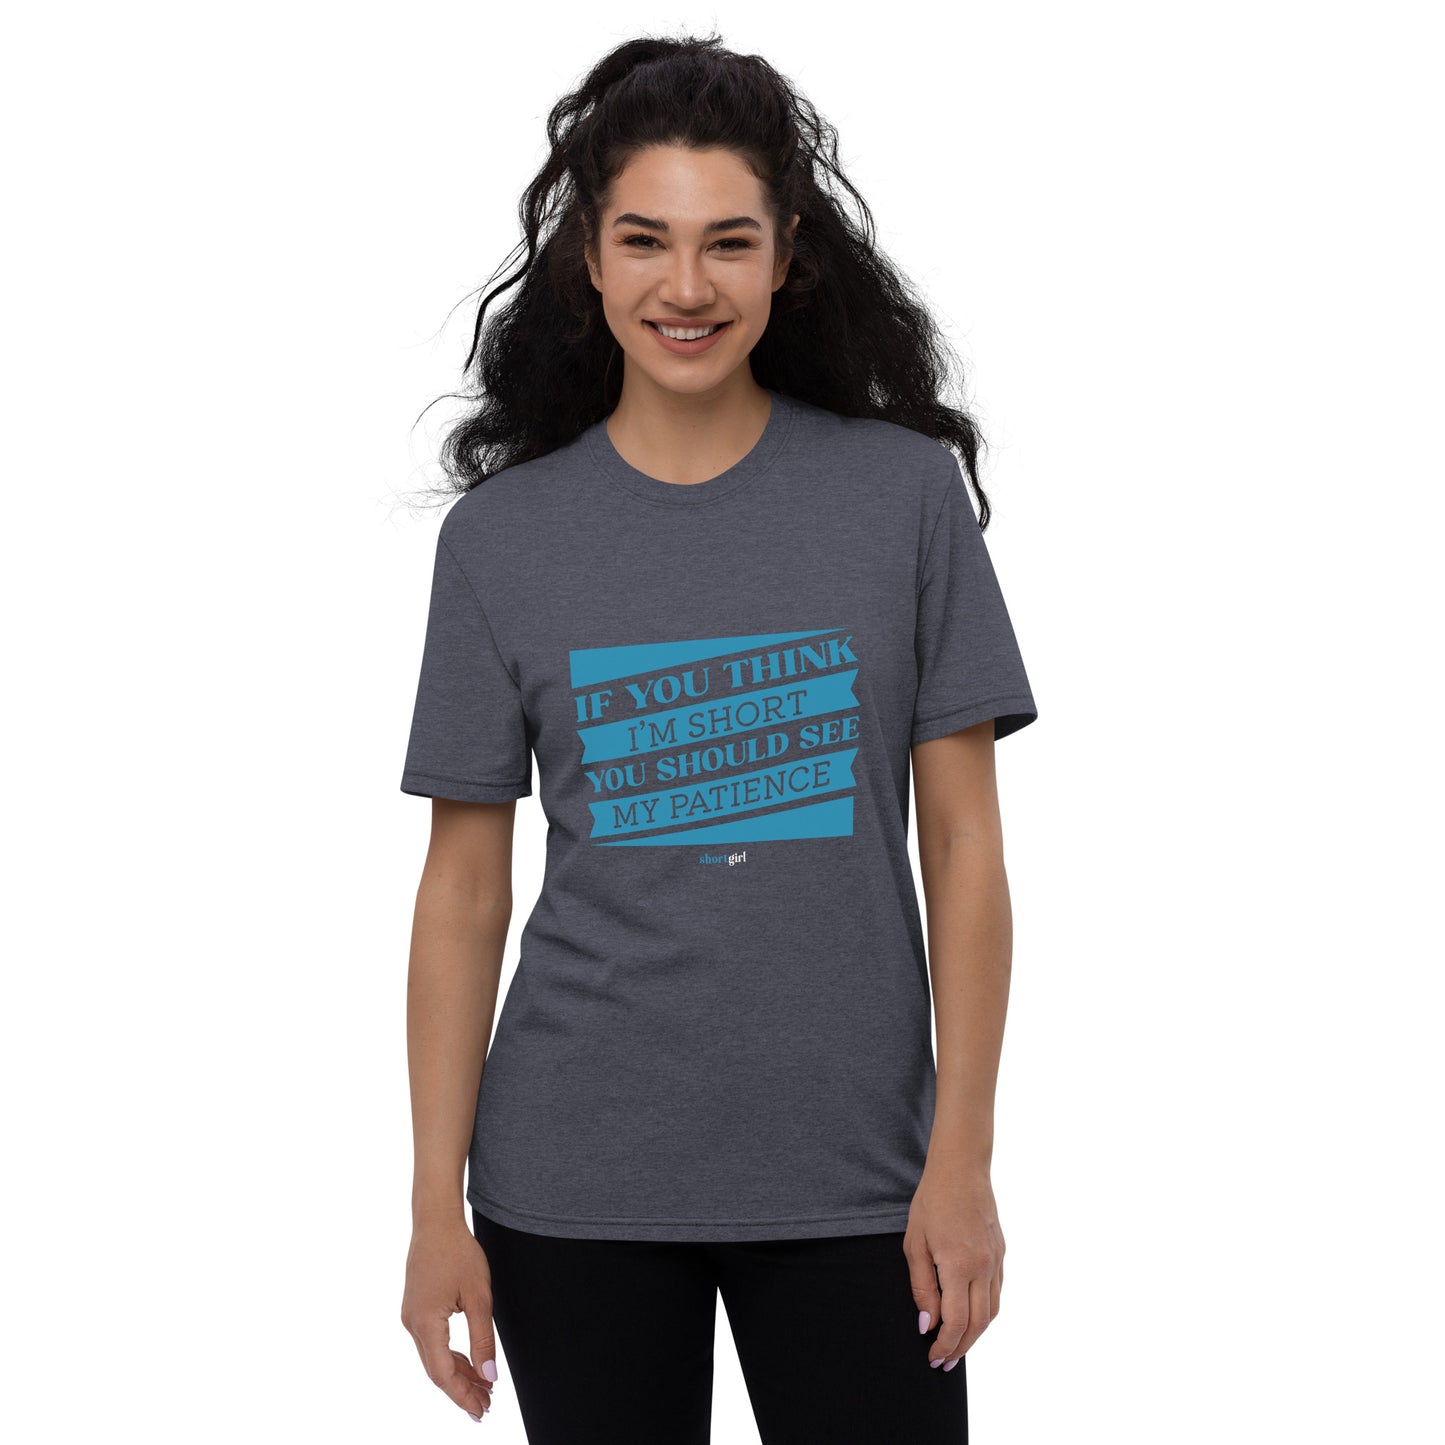 Unisex recycled t-shirt - If you think im short, you should see my patience